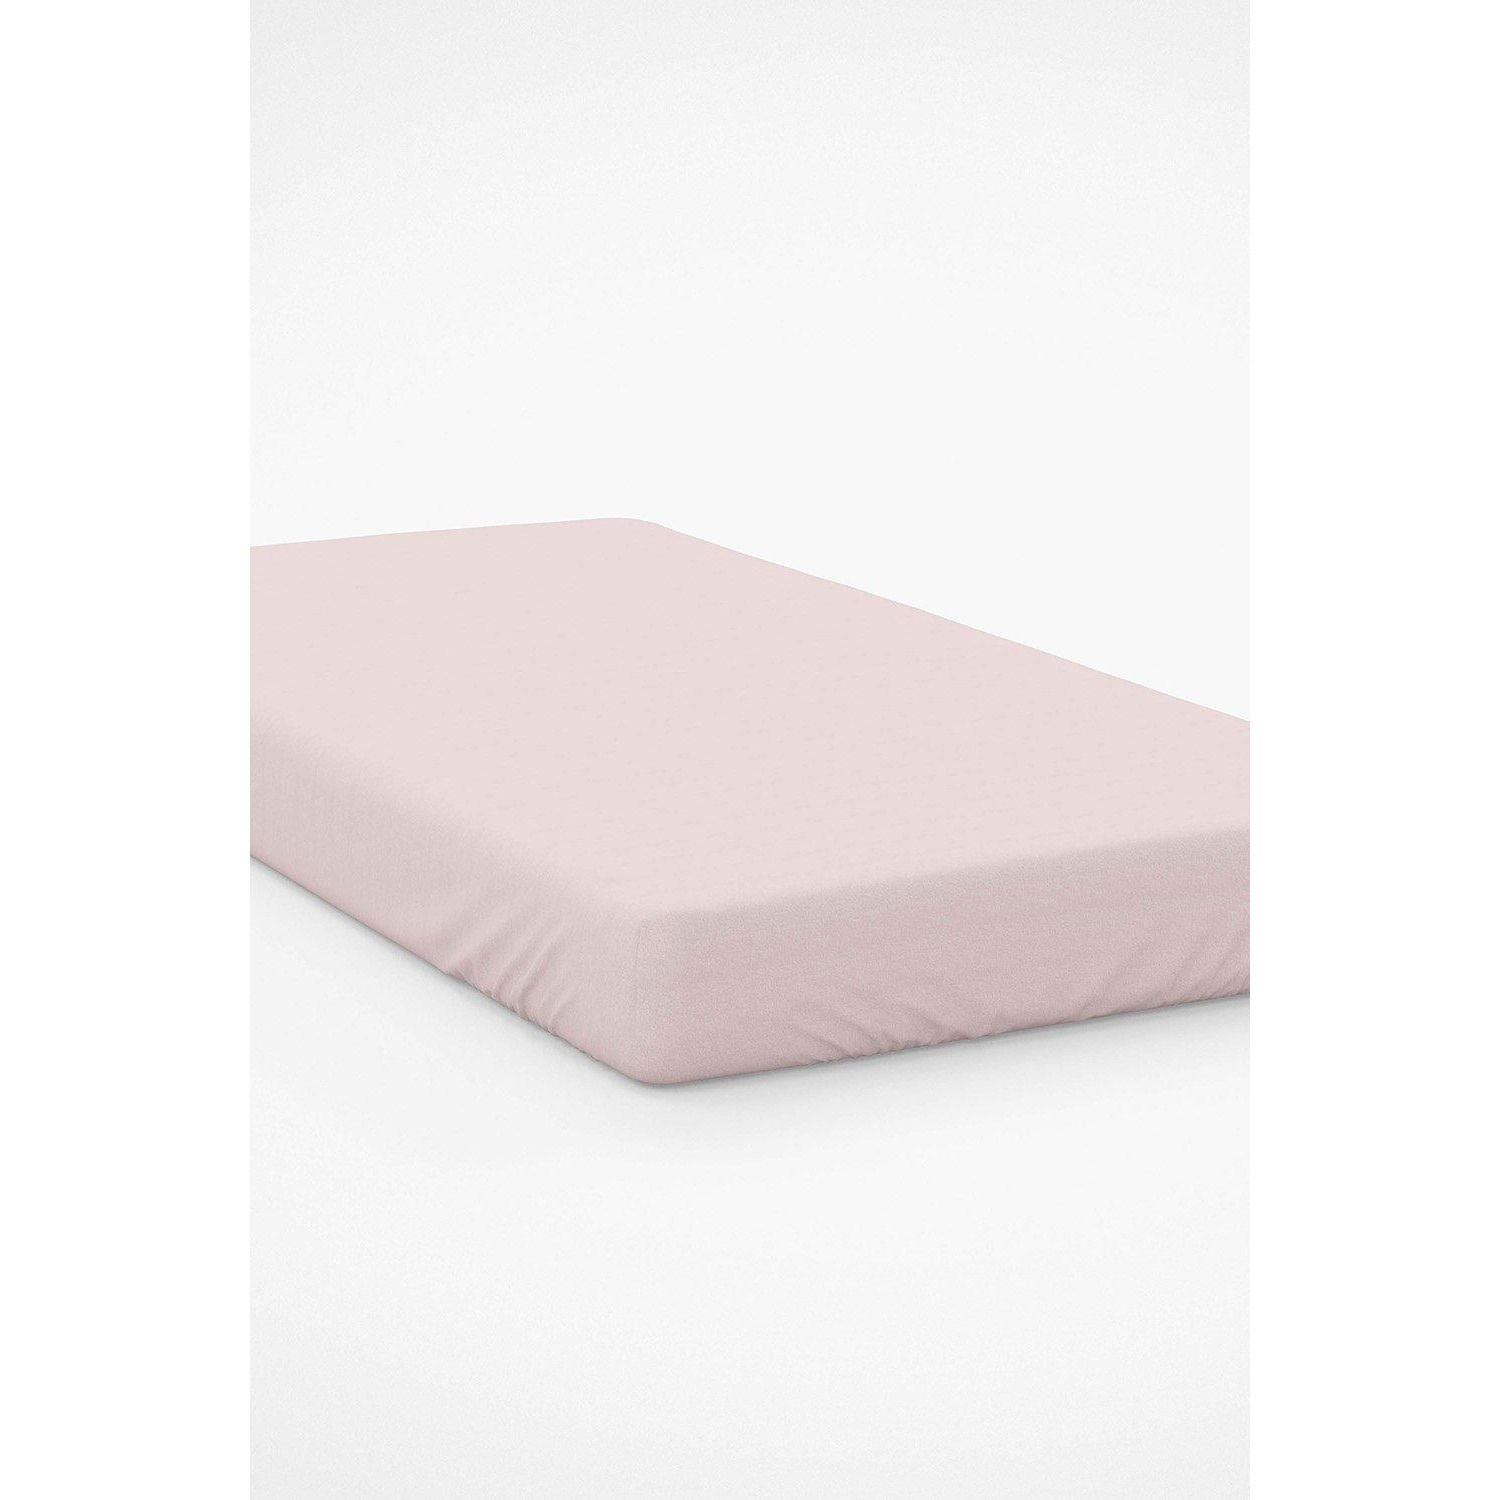 Easy Care 200 Thread Count Cotton Polyester Percale 28cm Fitted Sheet - image 1